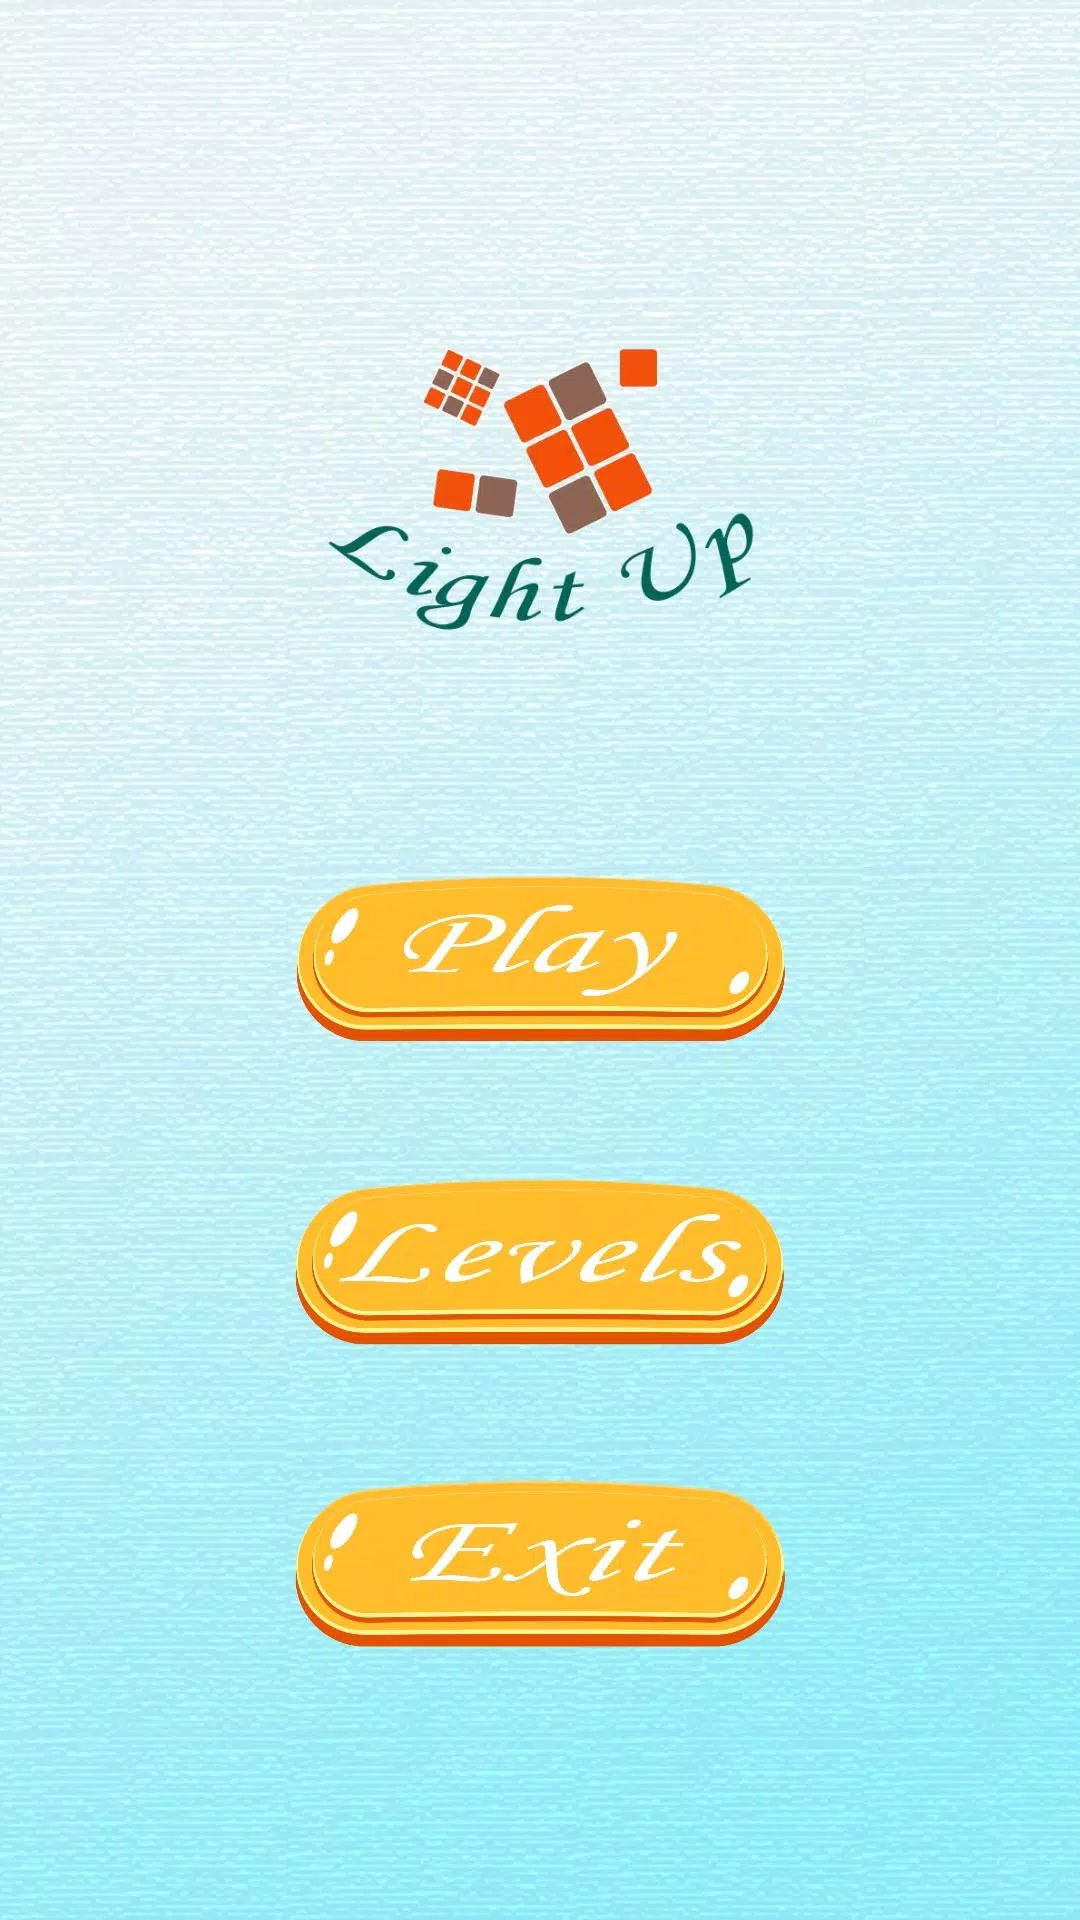 Light Up Puzzle Game for Android - APK Download